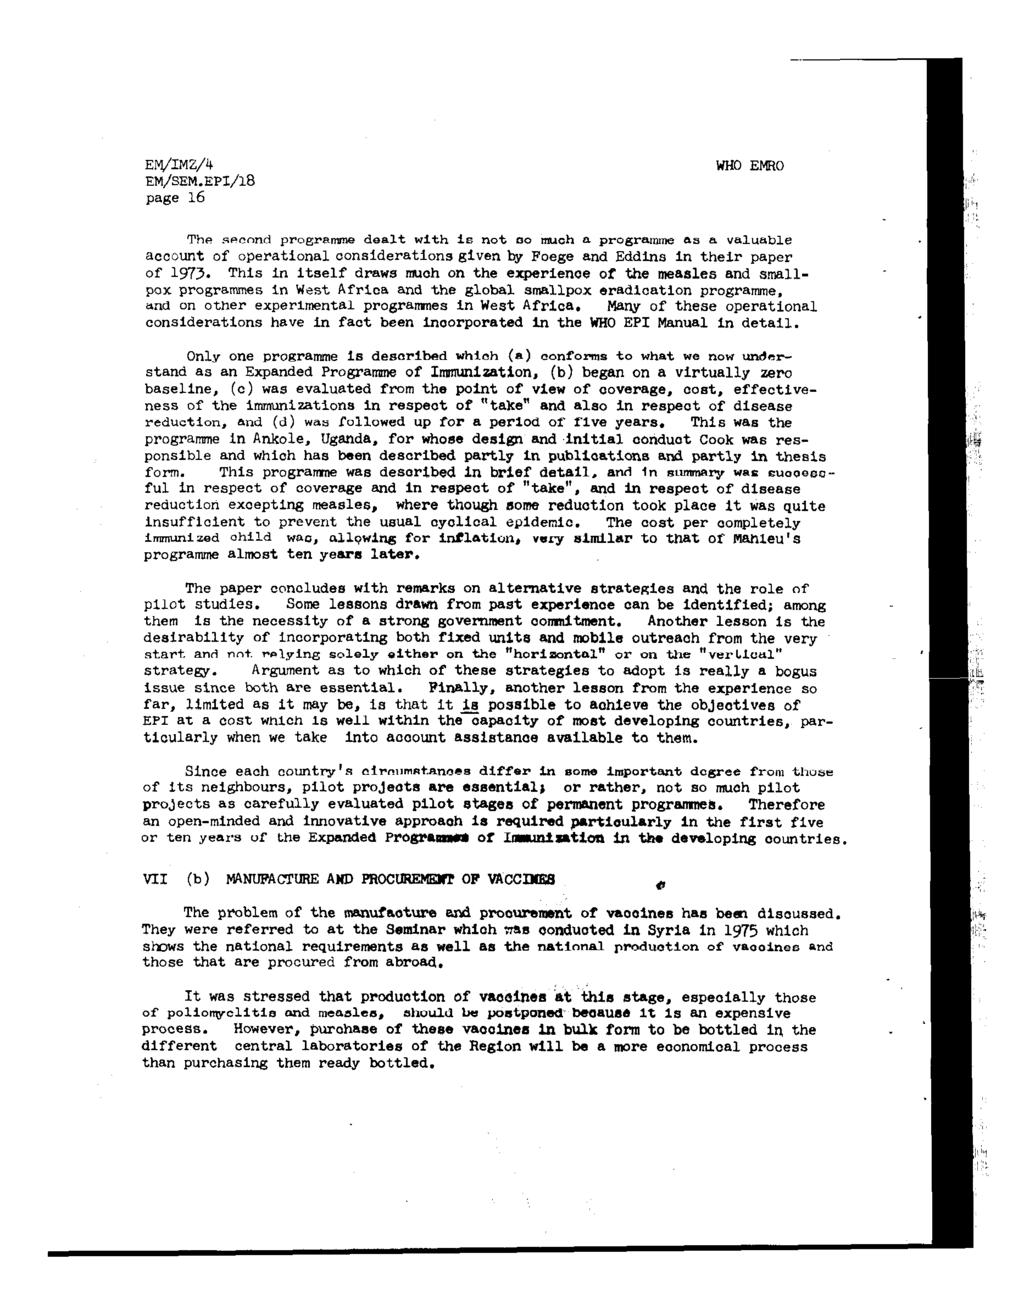 EM/IMZ/4 EM/SEM.EPS/l8 page 16 WHO EMRO The second pro&ramne dealt with is not 00 muoh a prograrm as a valuable account of operationaloonsiderationsgiven by Foege and Eddins in their paper of 1973.